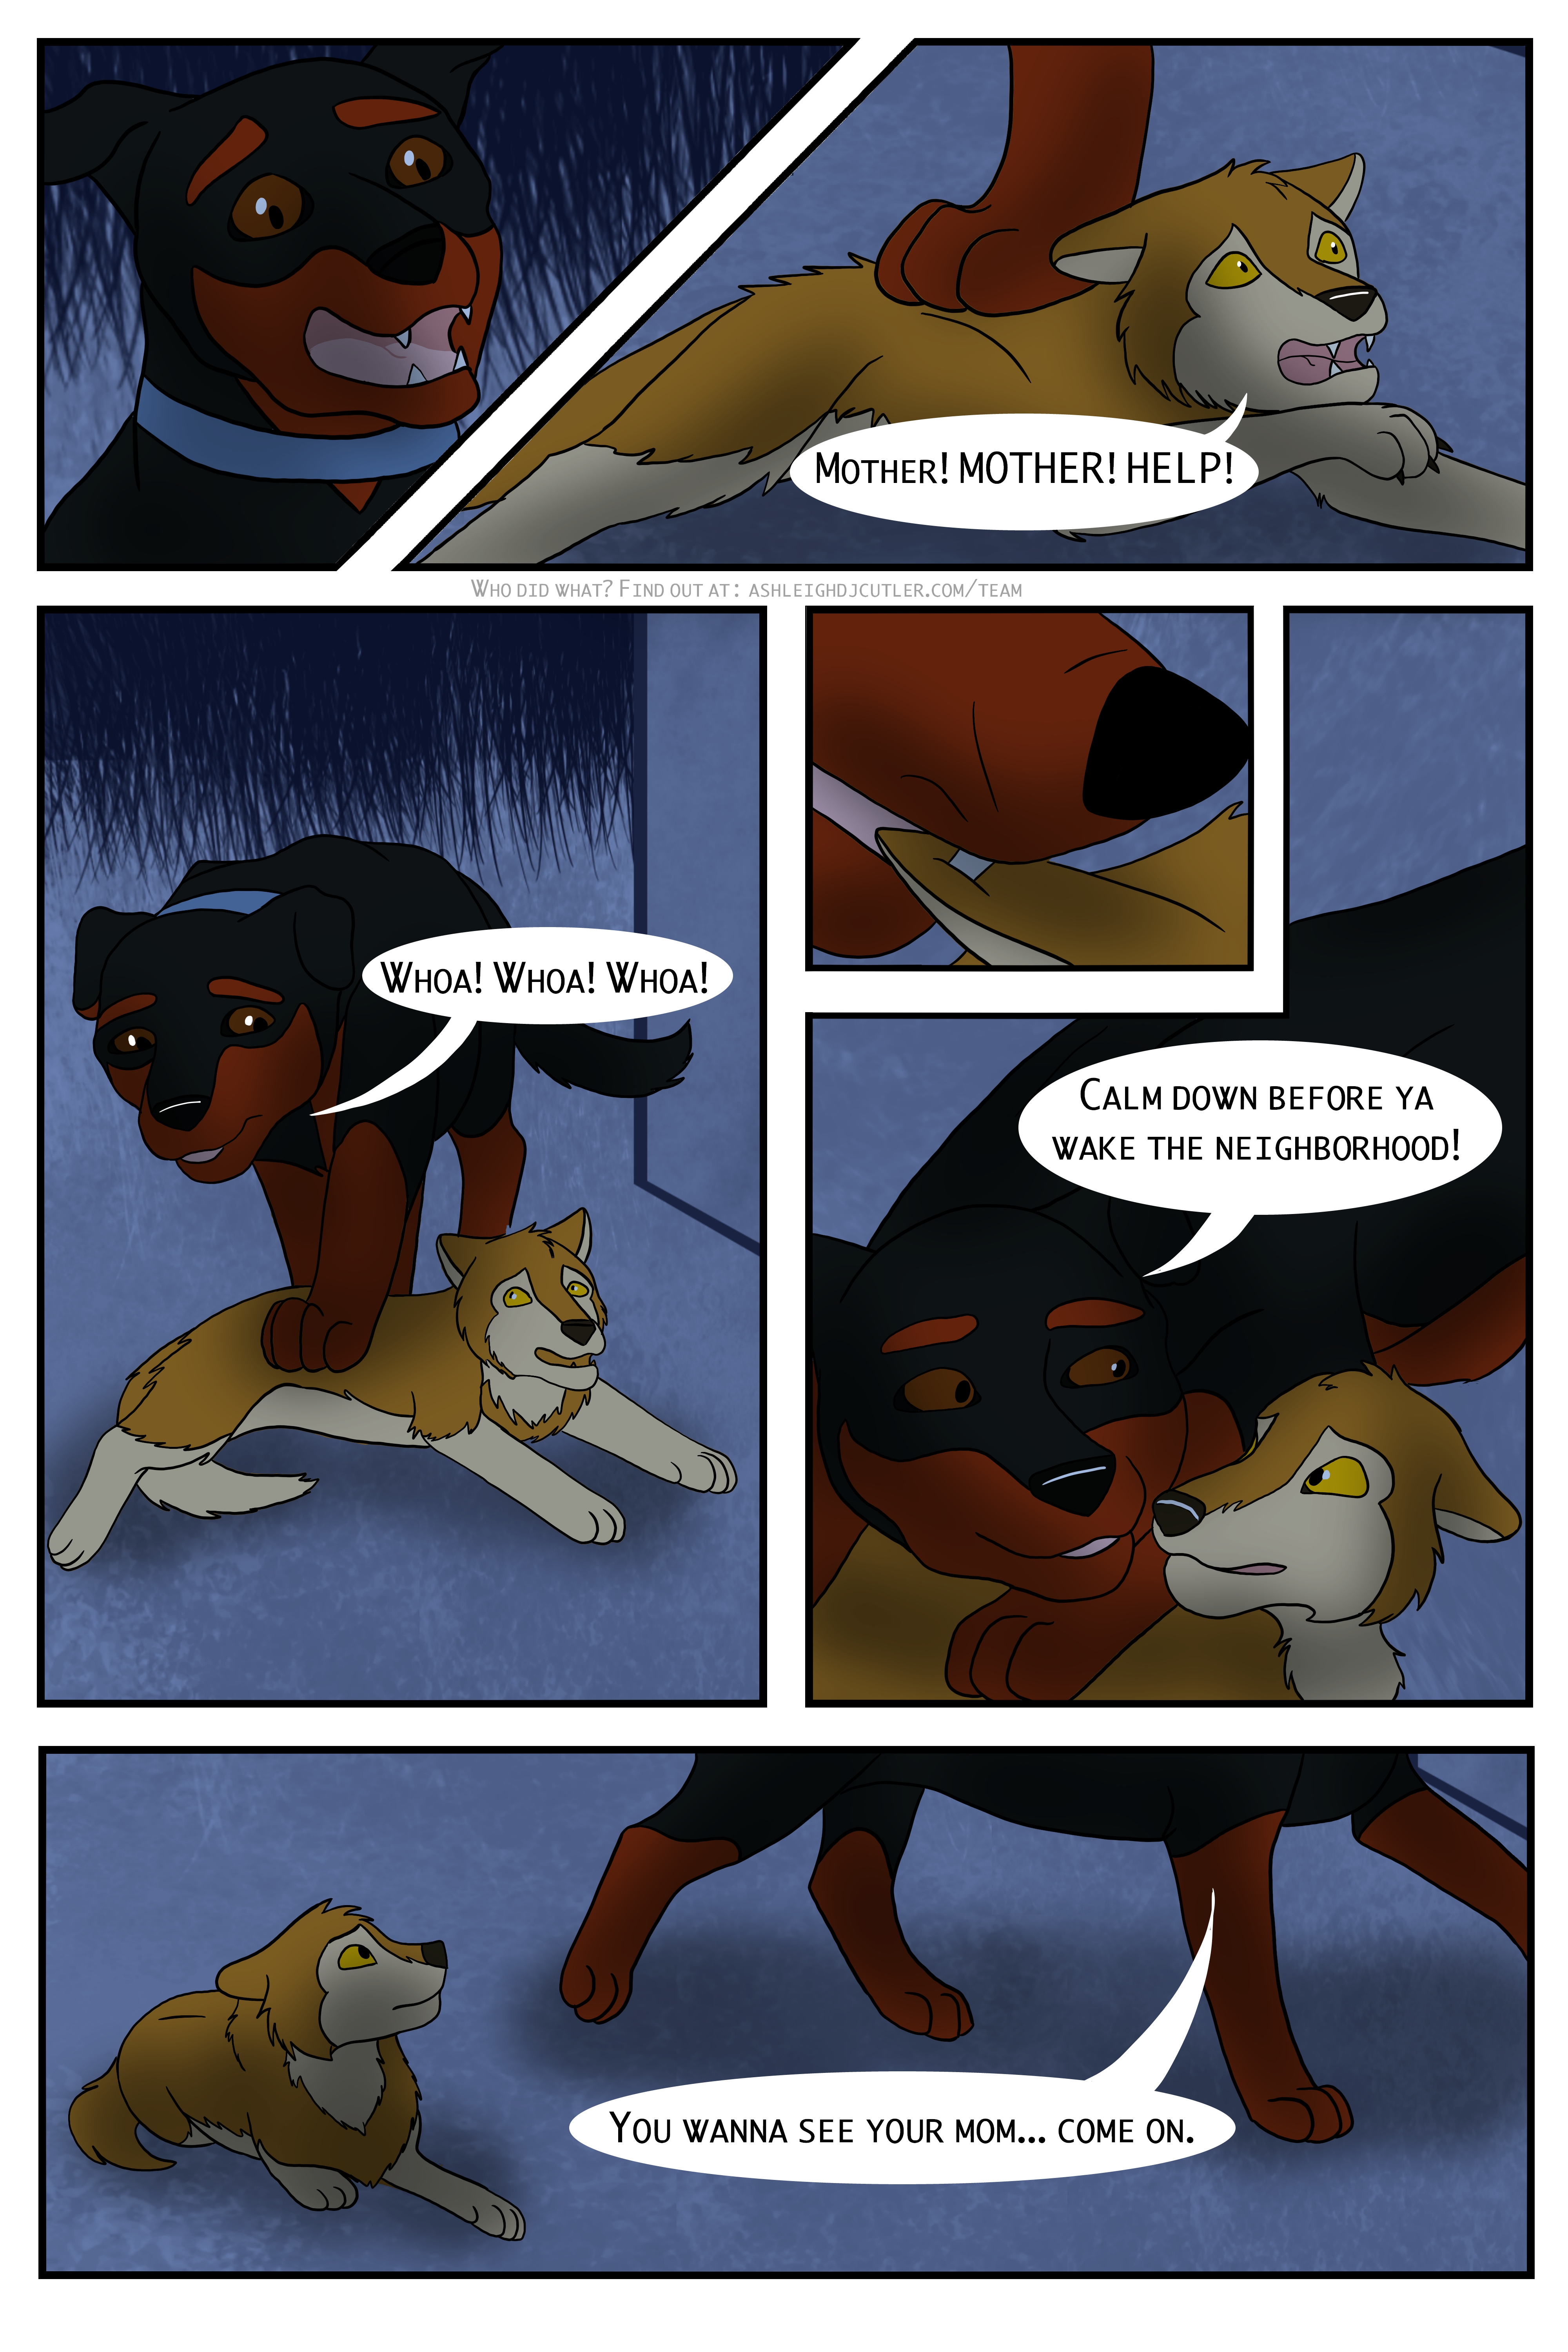 Book 1: Page 6